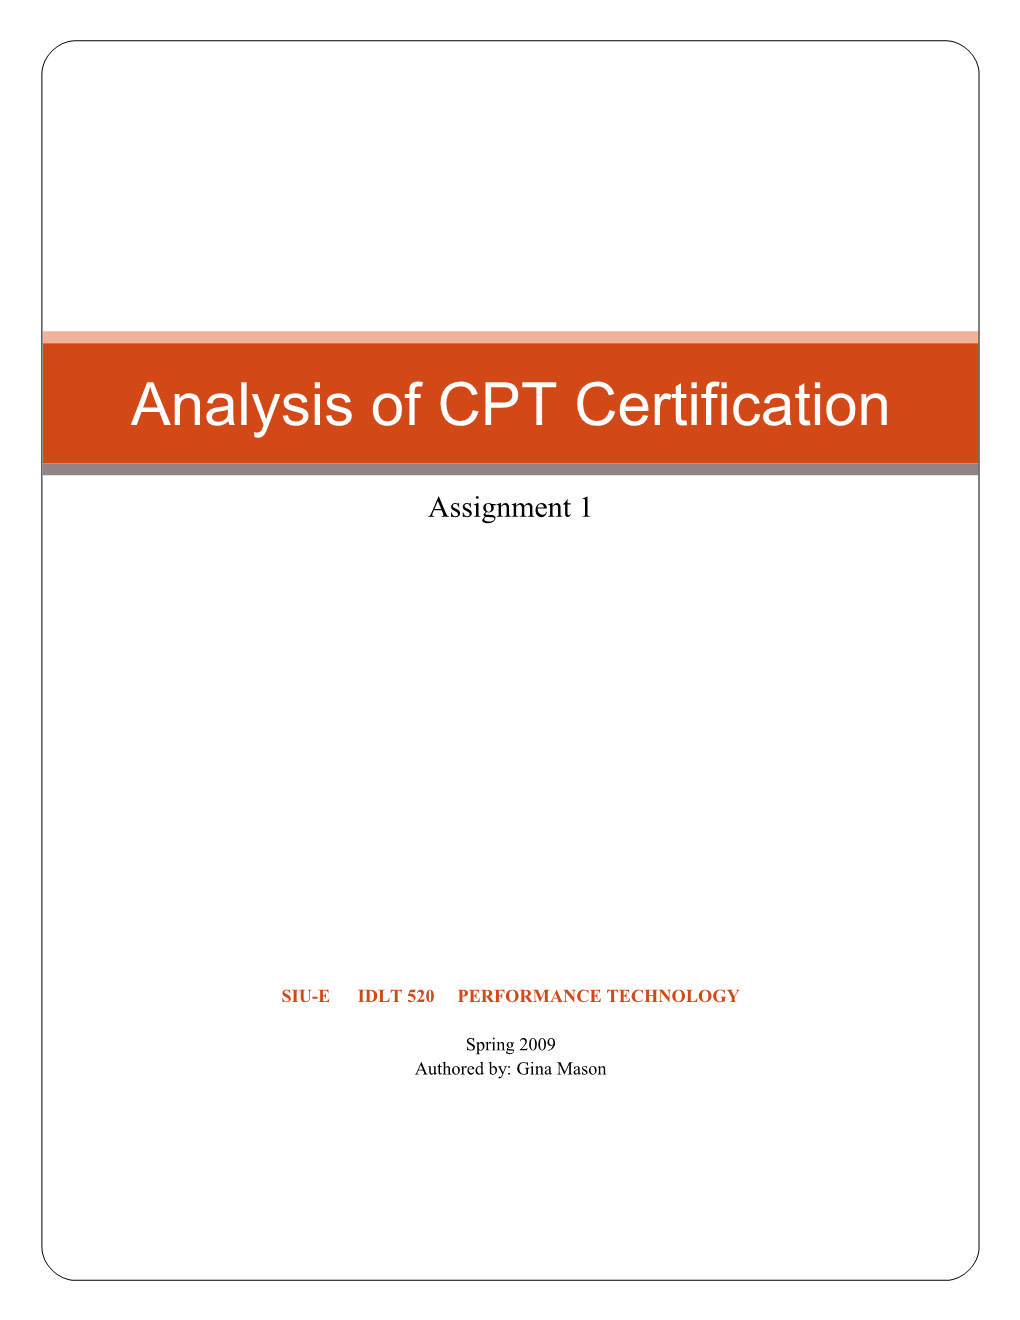 Analysis of CPT Certification